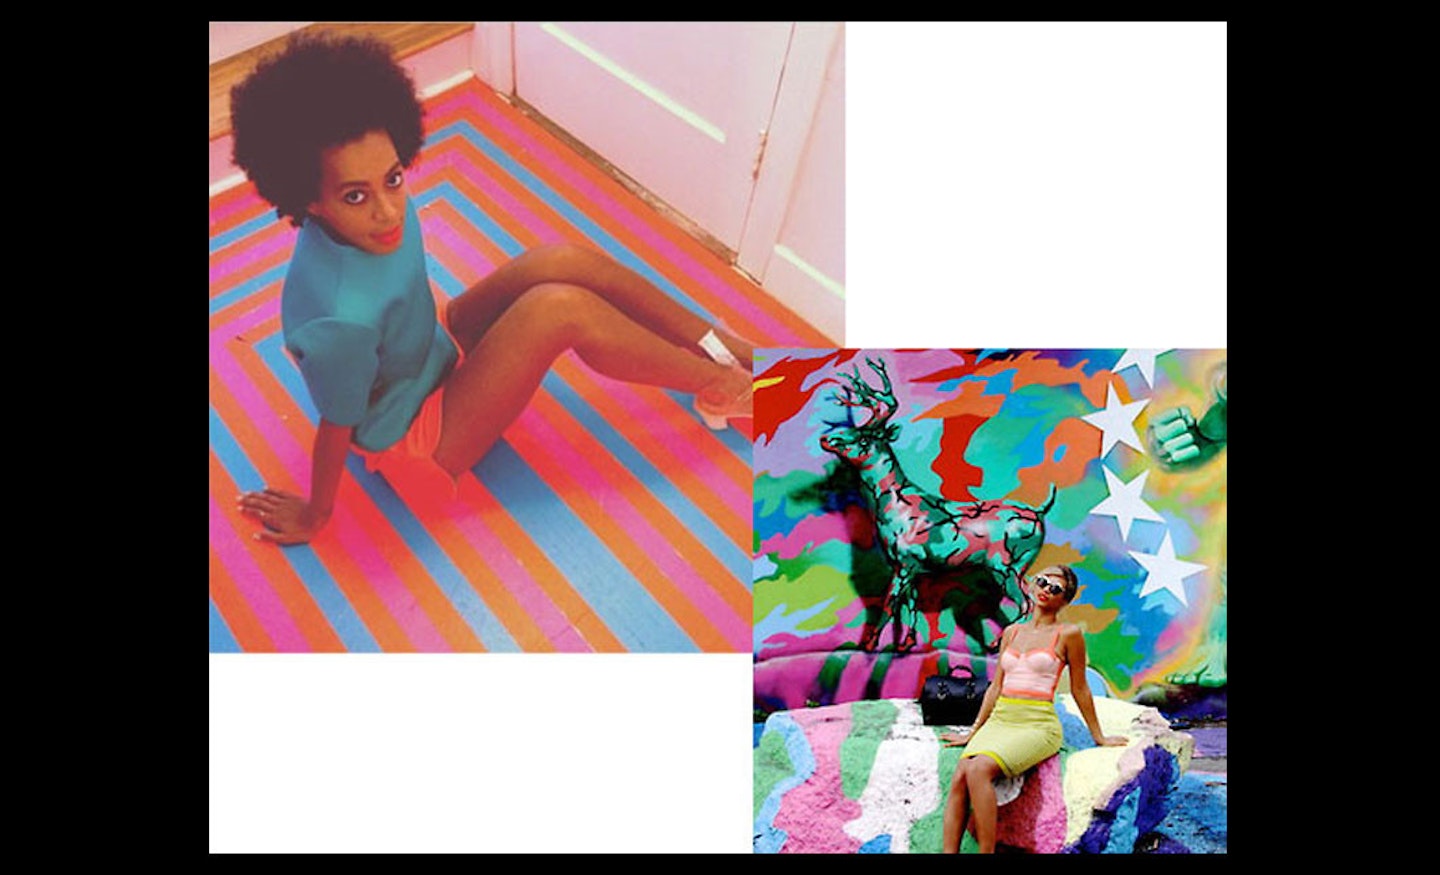 Block colour separates and artsy backdrops? It's a Knowles sister insta-formula